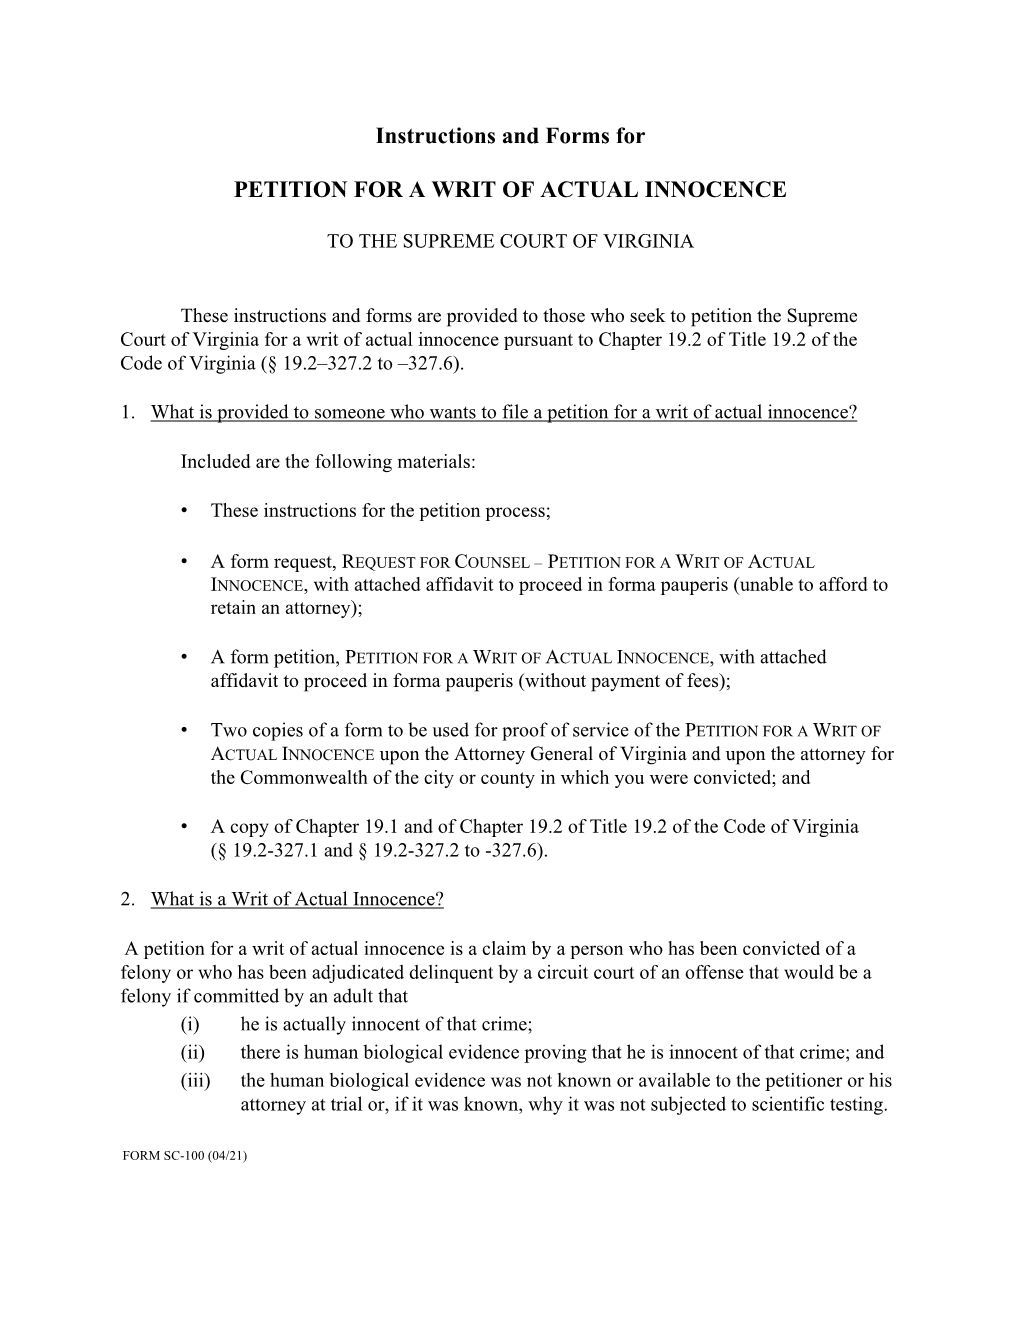 Instructions and Forms for PETITION for a WRIT of ACTUAL